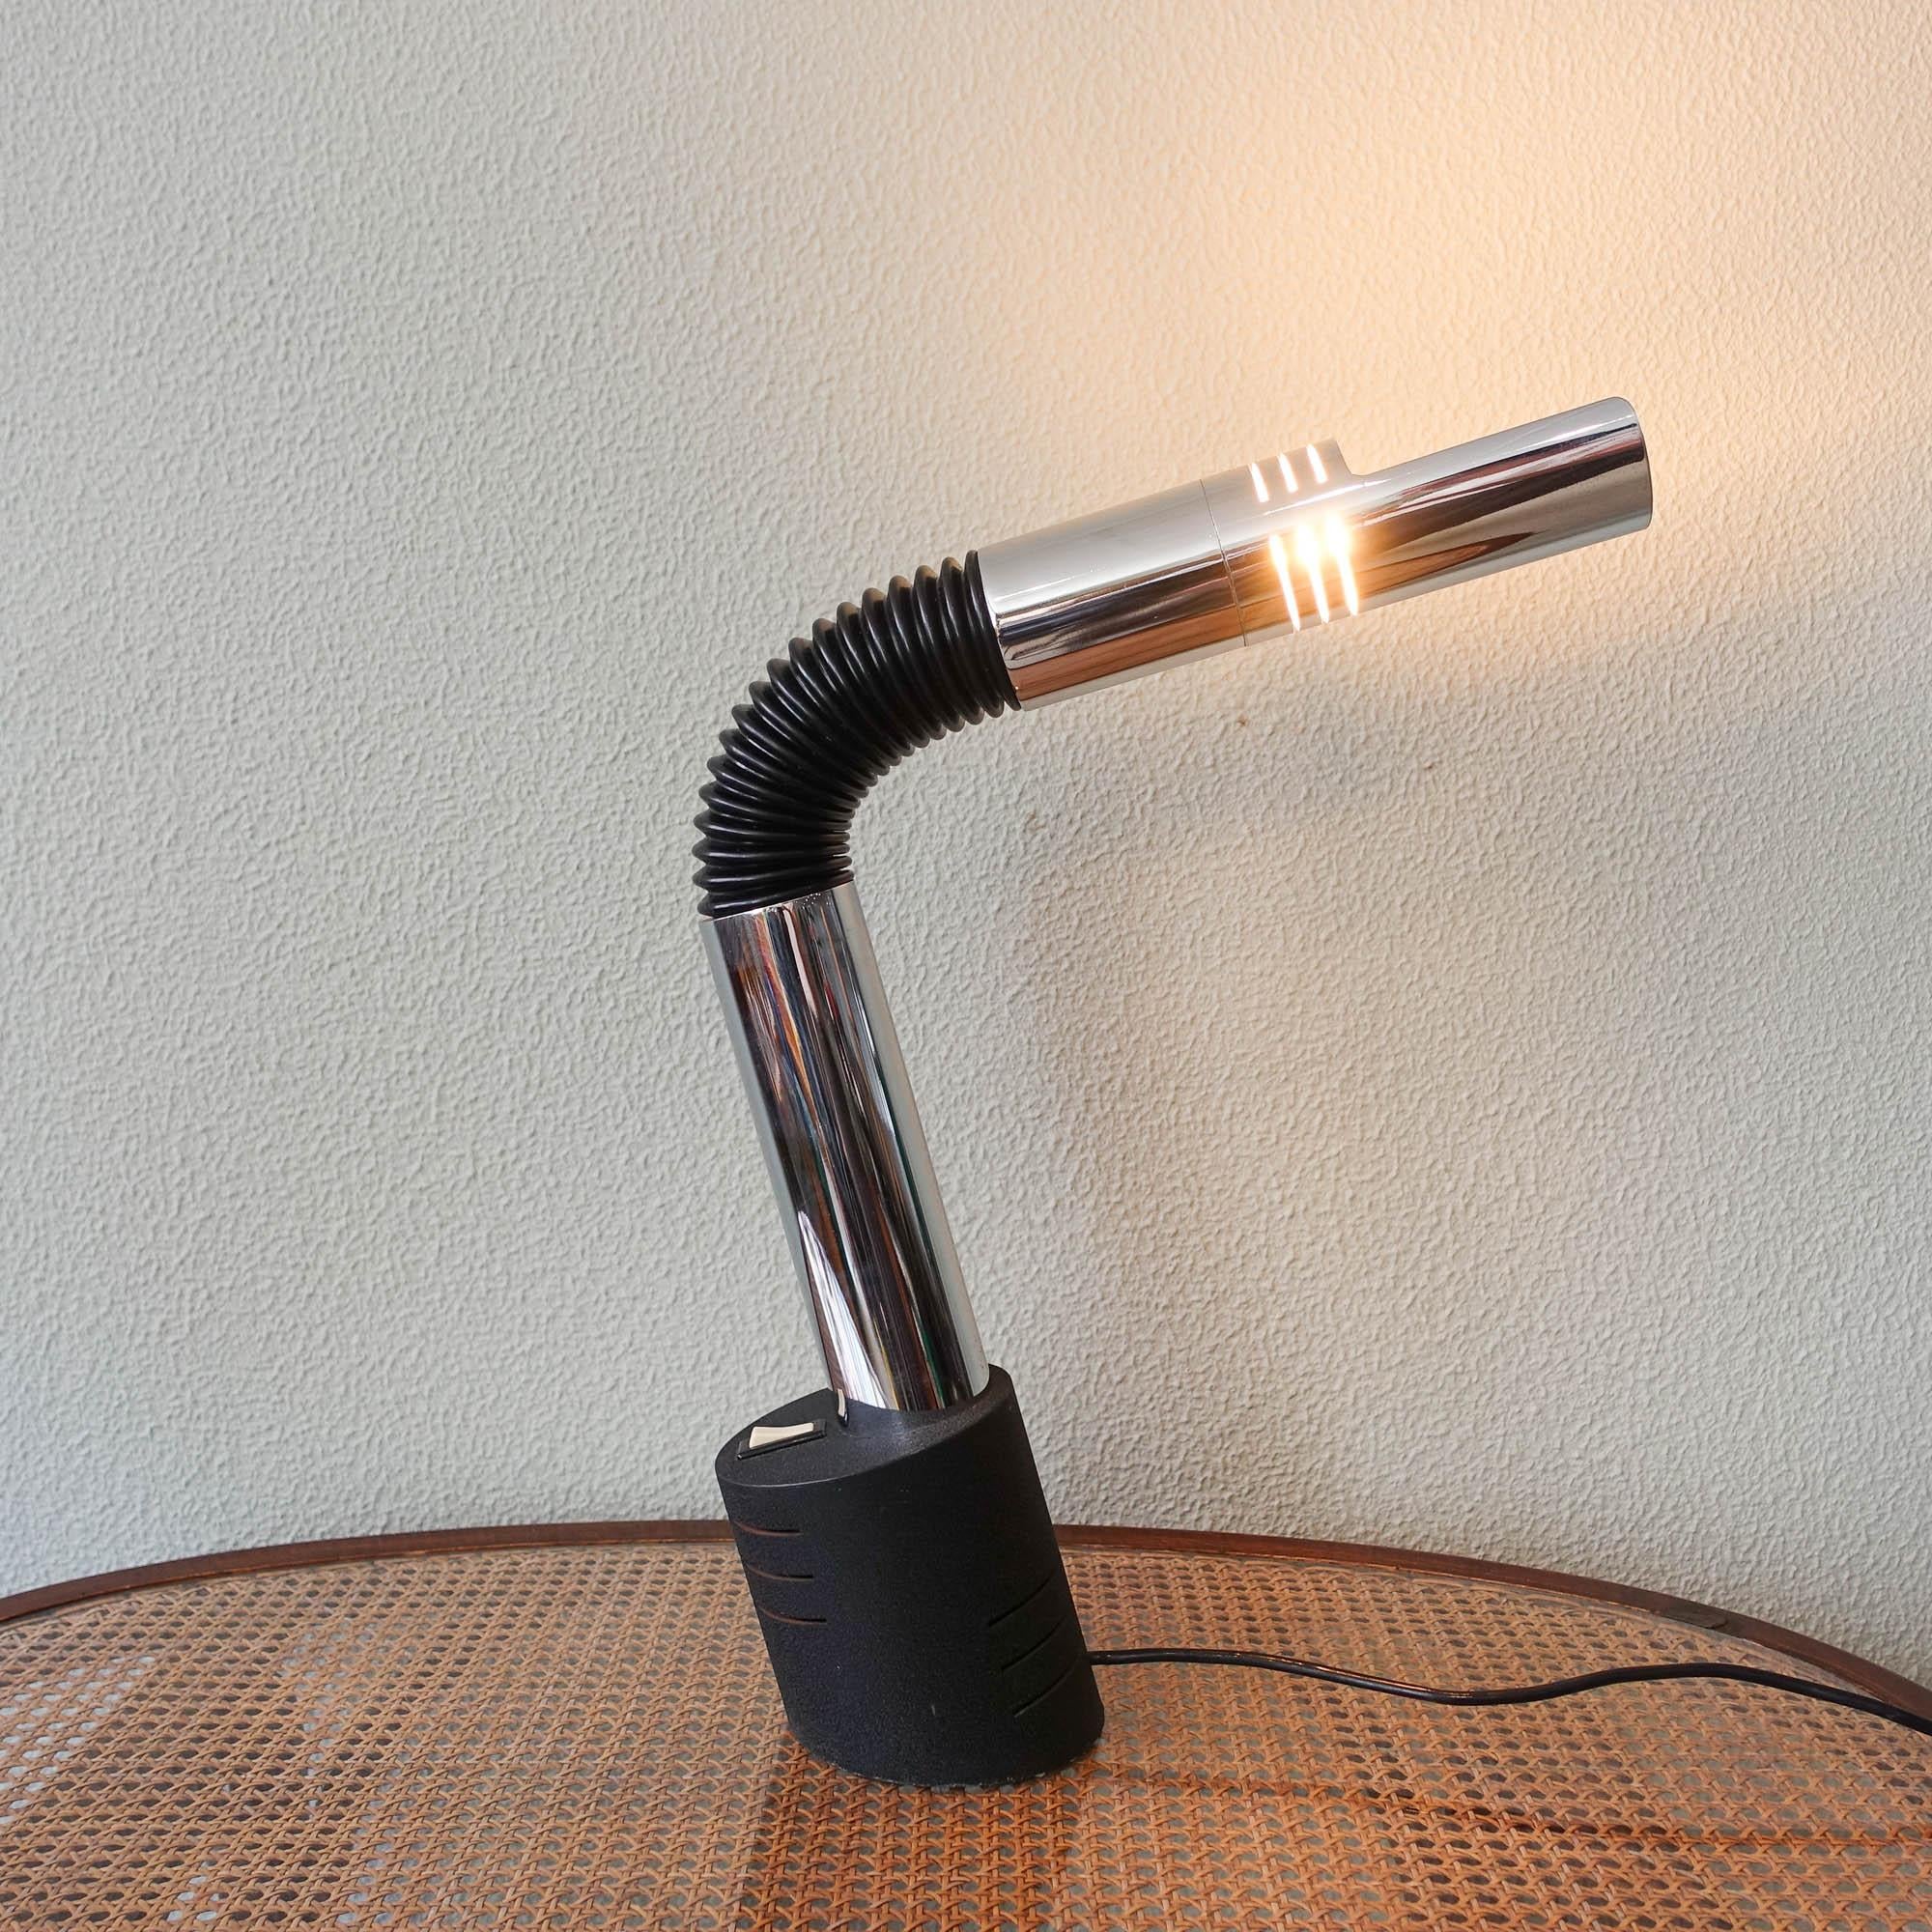 Pair of “Elbow” Table Lamp by E. Bellini for Targetti Sankey, 1970s For Sale 10